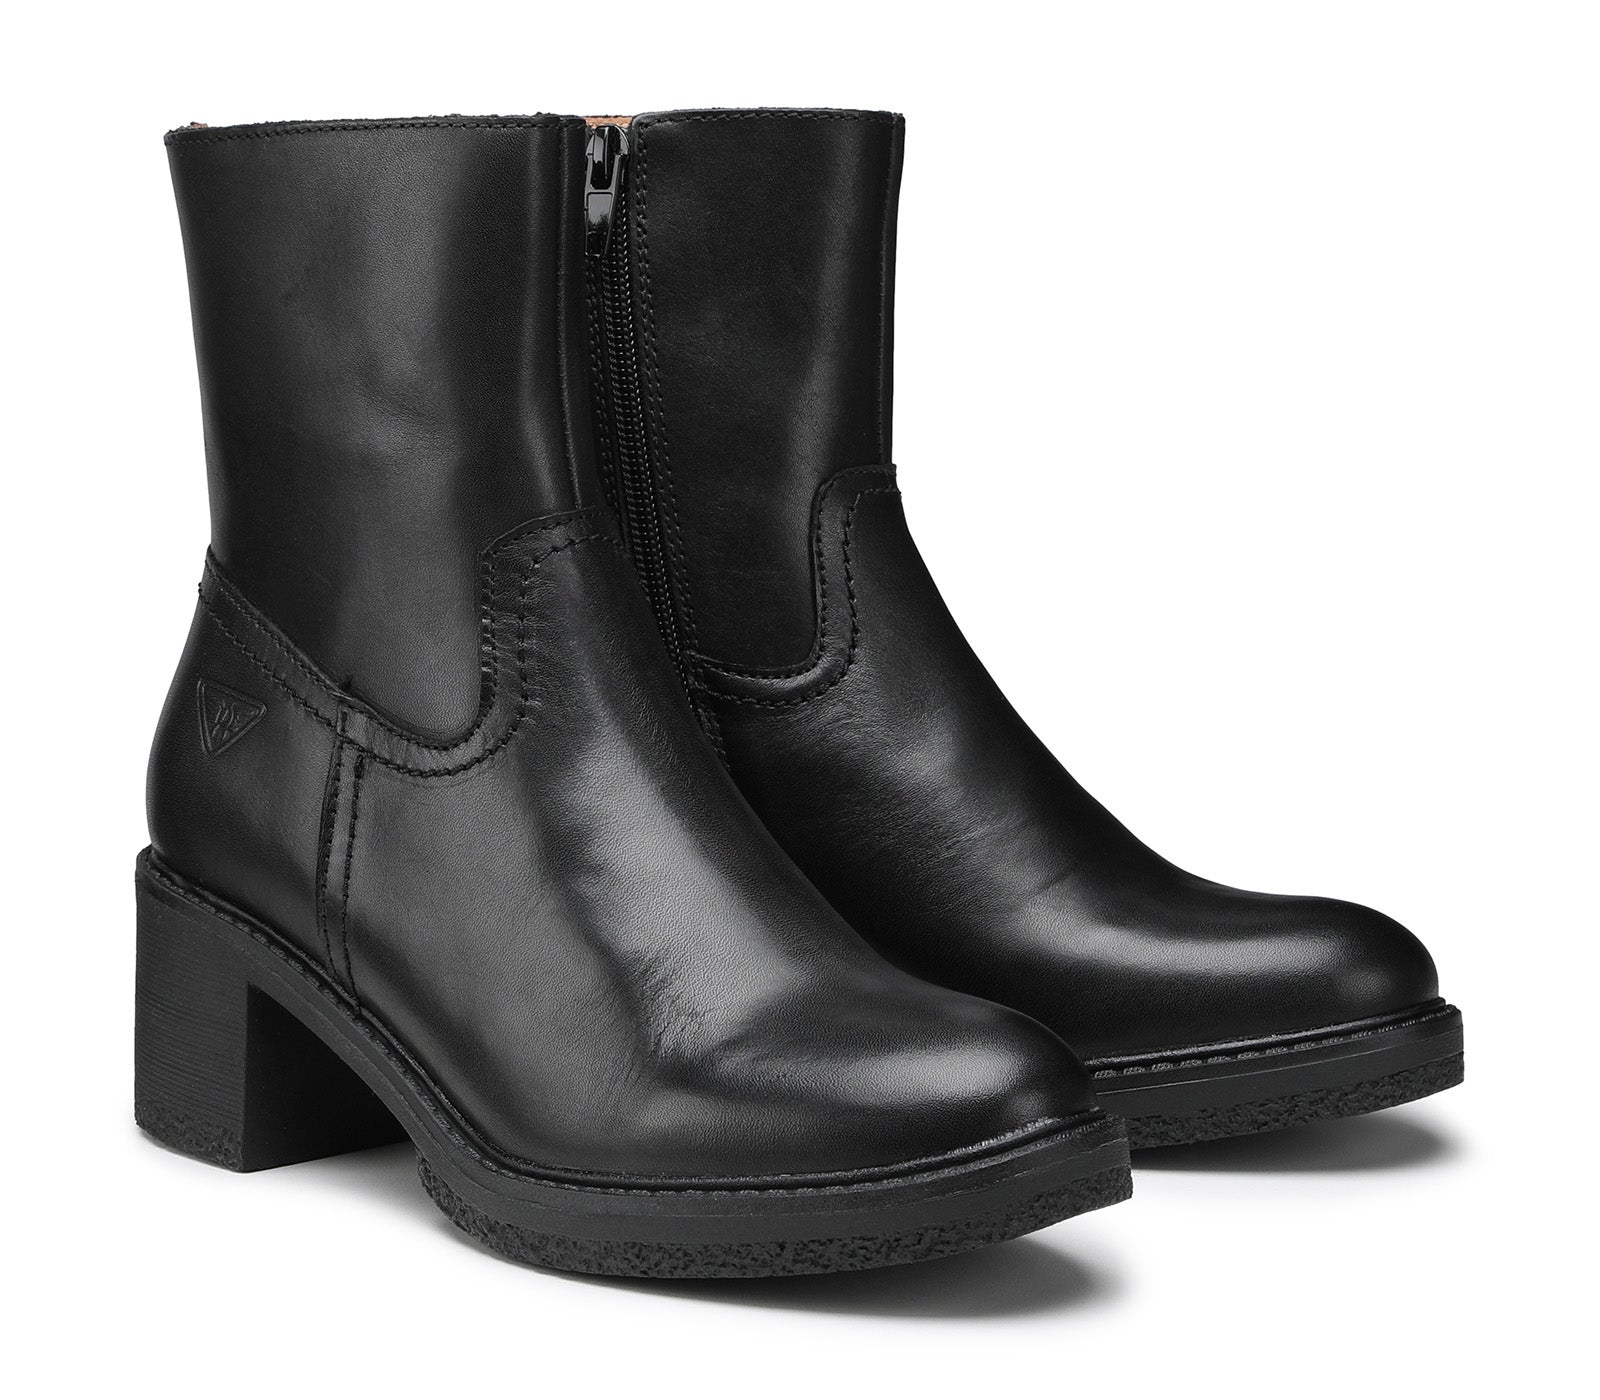 Women's Black Leather Ankle Boots with Block Heel